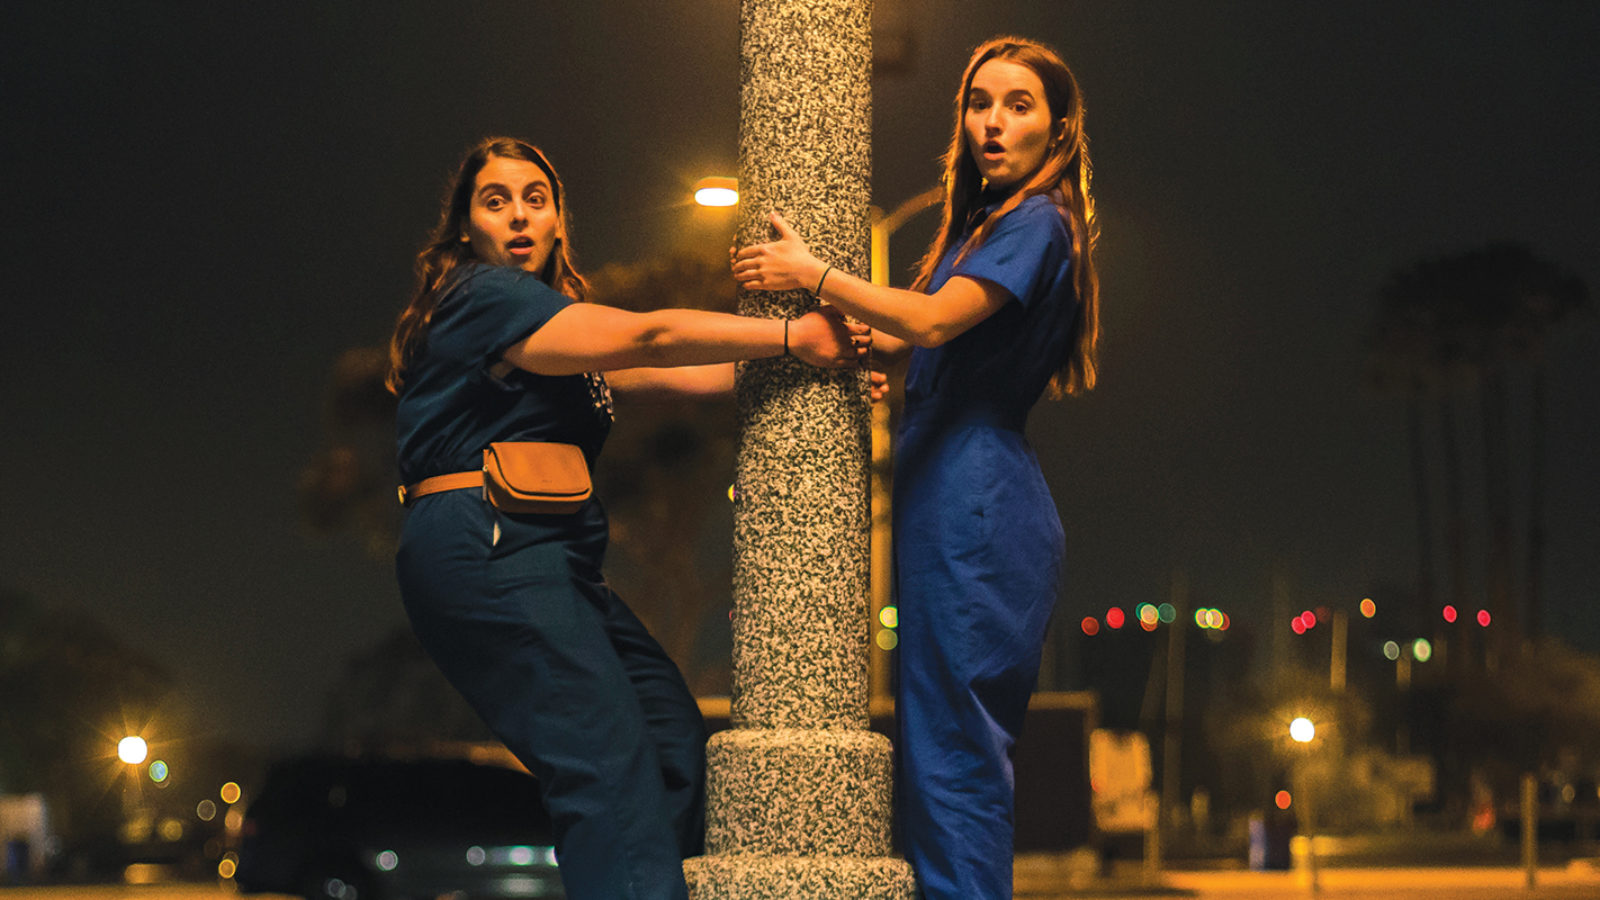 Beanie Feldstein stars as Molly and Kaitlyn Dever as Amy in Olivia Wilde’s directorial debut, BOOKSMART, an Annapurna Pictures release.
Credit: Francois Duhamel / Annapurna Pictures